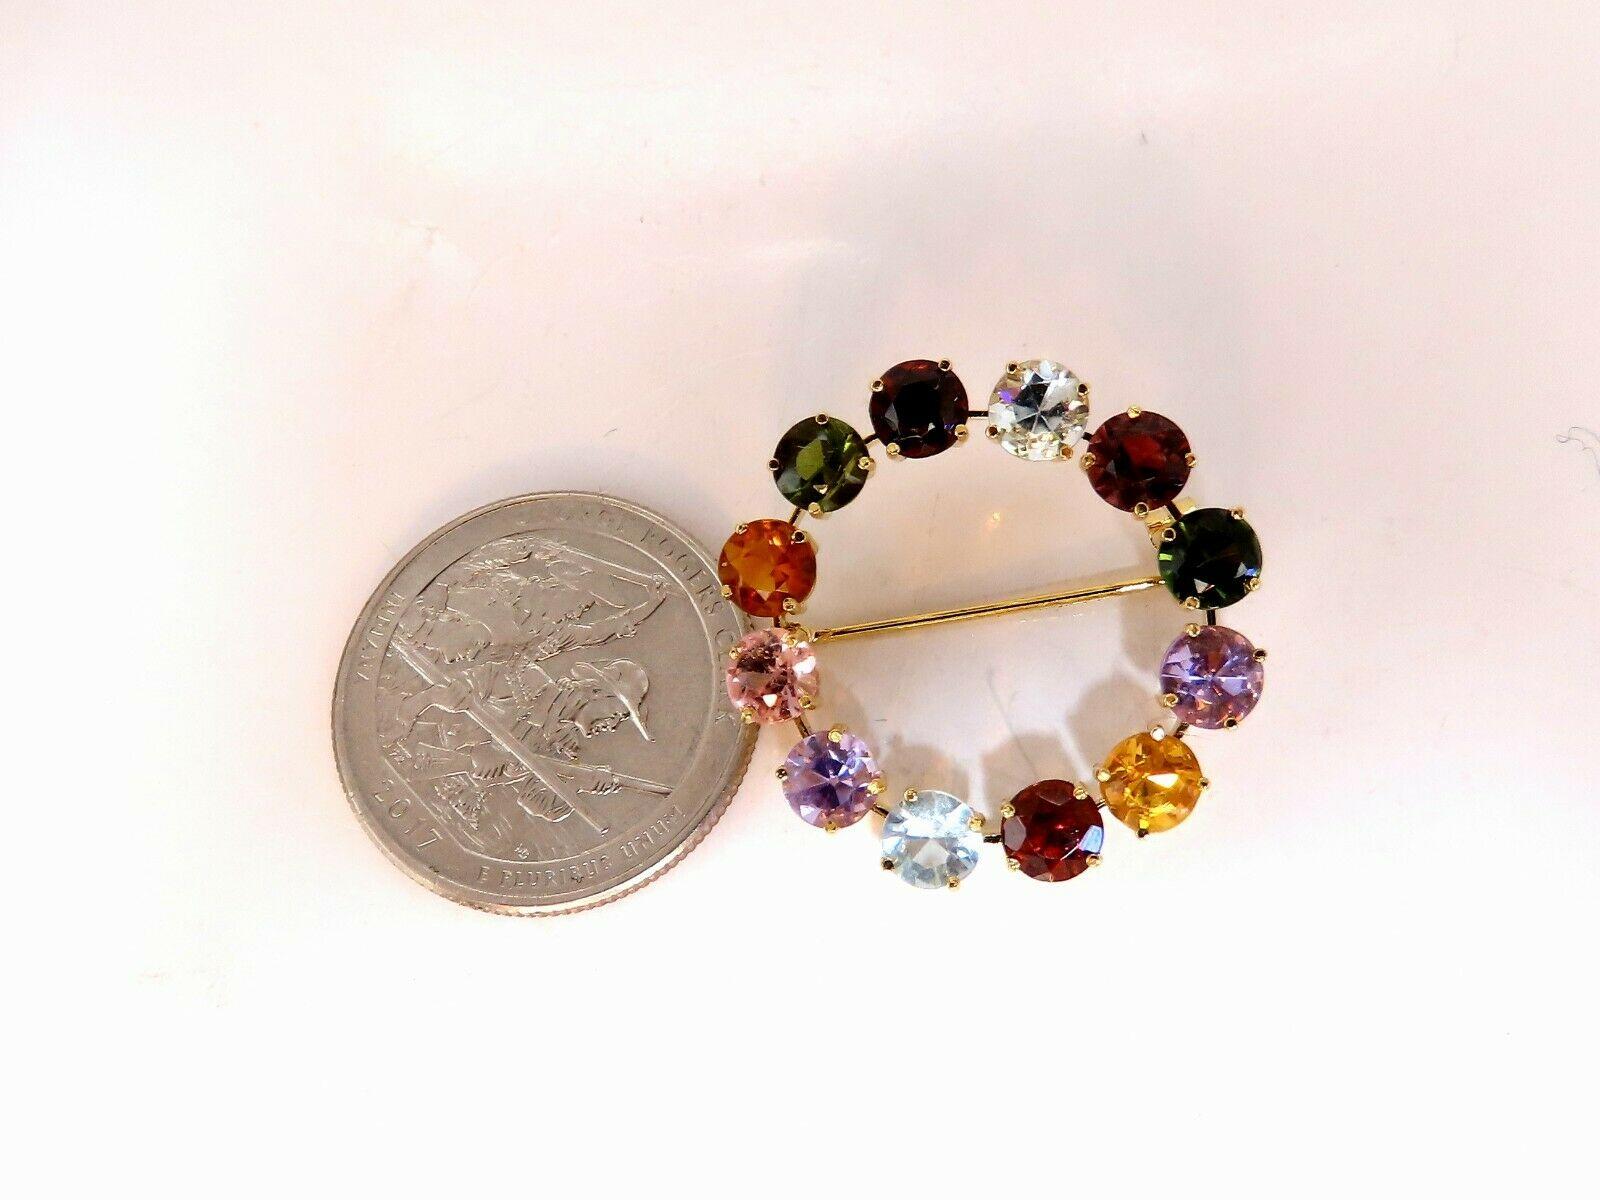 Vintage Endless Circle Brooch Pin.

7.00cts of natural gems.

Pink Spinel, Peridot, Citrine, Garnet, Pink Tourmaline, Amethyst & Aquamarine.

Round cuts

Each Stone: 4.8mm average

Rounds, Full cut Brilliant.

Clean Clarity & Transparent

14kt